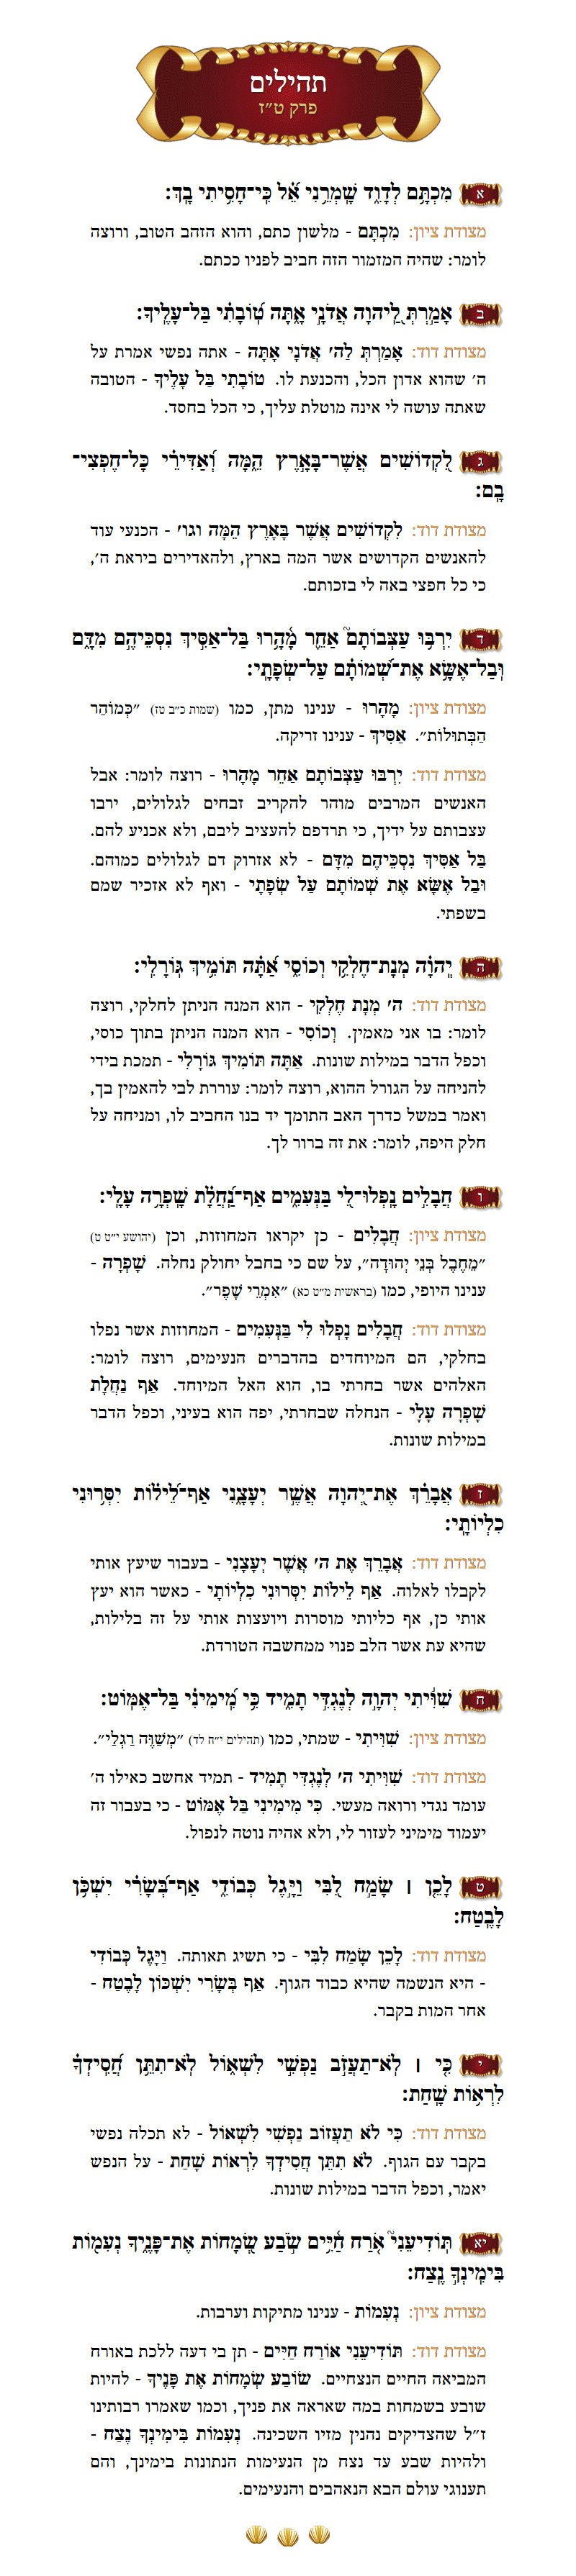 Sefer Tehillim Chapter 61 with commentary